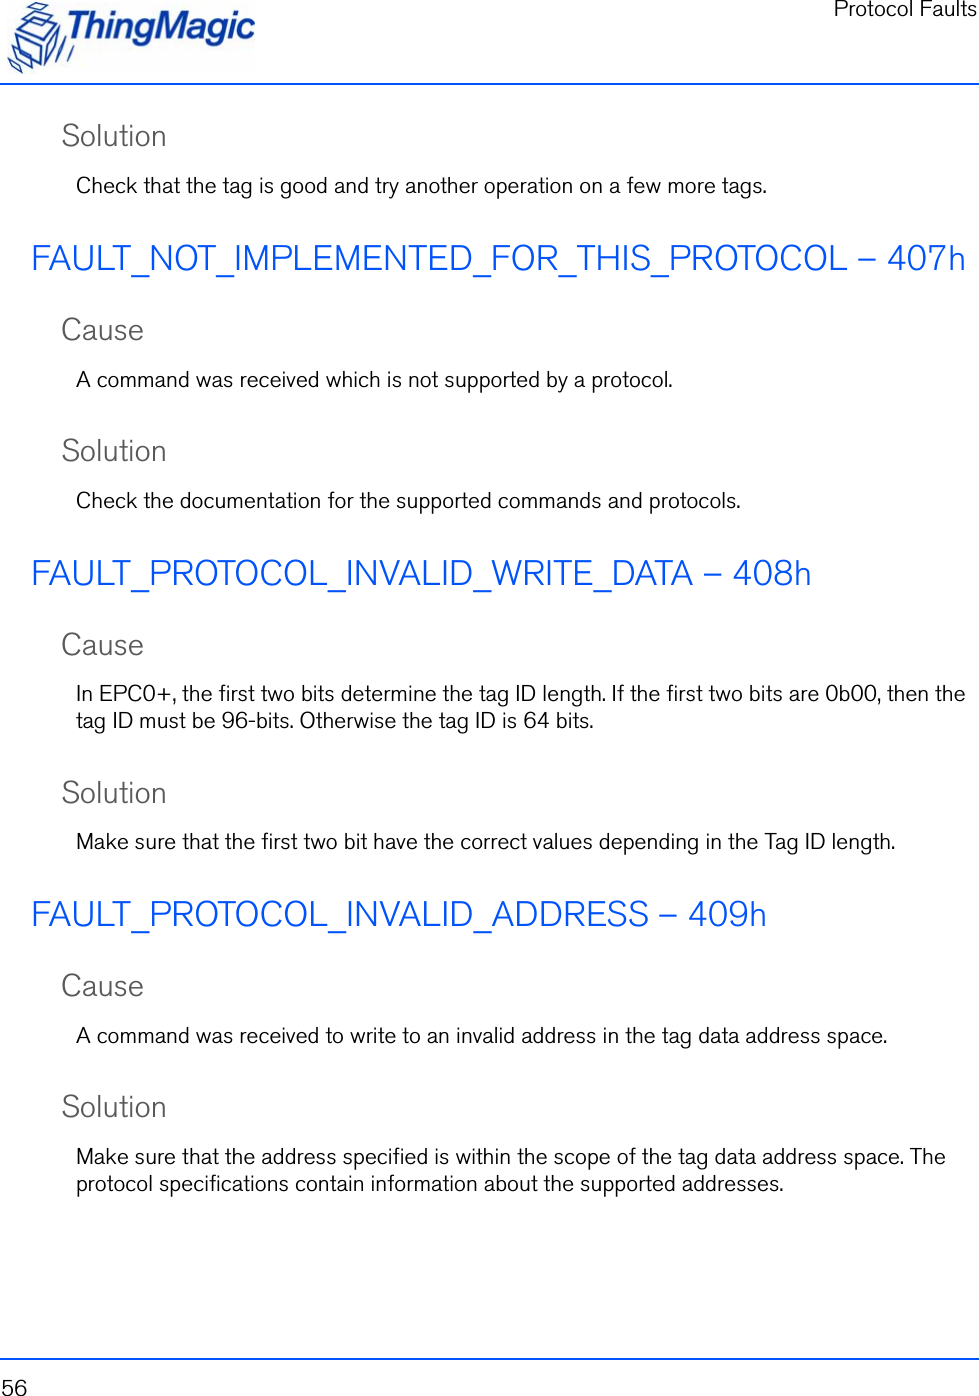 Protocol Faults56SolutionCheck that the tag is good and try another operation on a few more tags.FAULT_NOT_IMPLEMENTED_FOR_THIS_PROTOCOL – 407hCauseA command was received which is not supported by a protocol.SolutionCheck the documentation for the supported commands and protocols.FAULT_PROTOCOL_INVALID_WRITE_DATA – 408hCauseIn EPC0+, the first two bits determine the tag ID length. If the first two bits are 0b00, then the tag ID must be 96-bits. Otherwise the tag ID is 64 bits.SolutionMake sure that the first two bit have the correct values depending in the Tag ID length.FAULT_PROTOCOL_INVALID_ADDRESS – 409hCauseA command was received to write to an invalid address in the tag data address space. SolutionMake sure that the address specified is within the scope of the tag data address space. The protocol specifications contain information about the supported addresses.